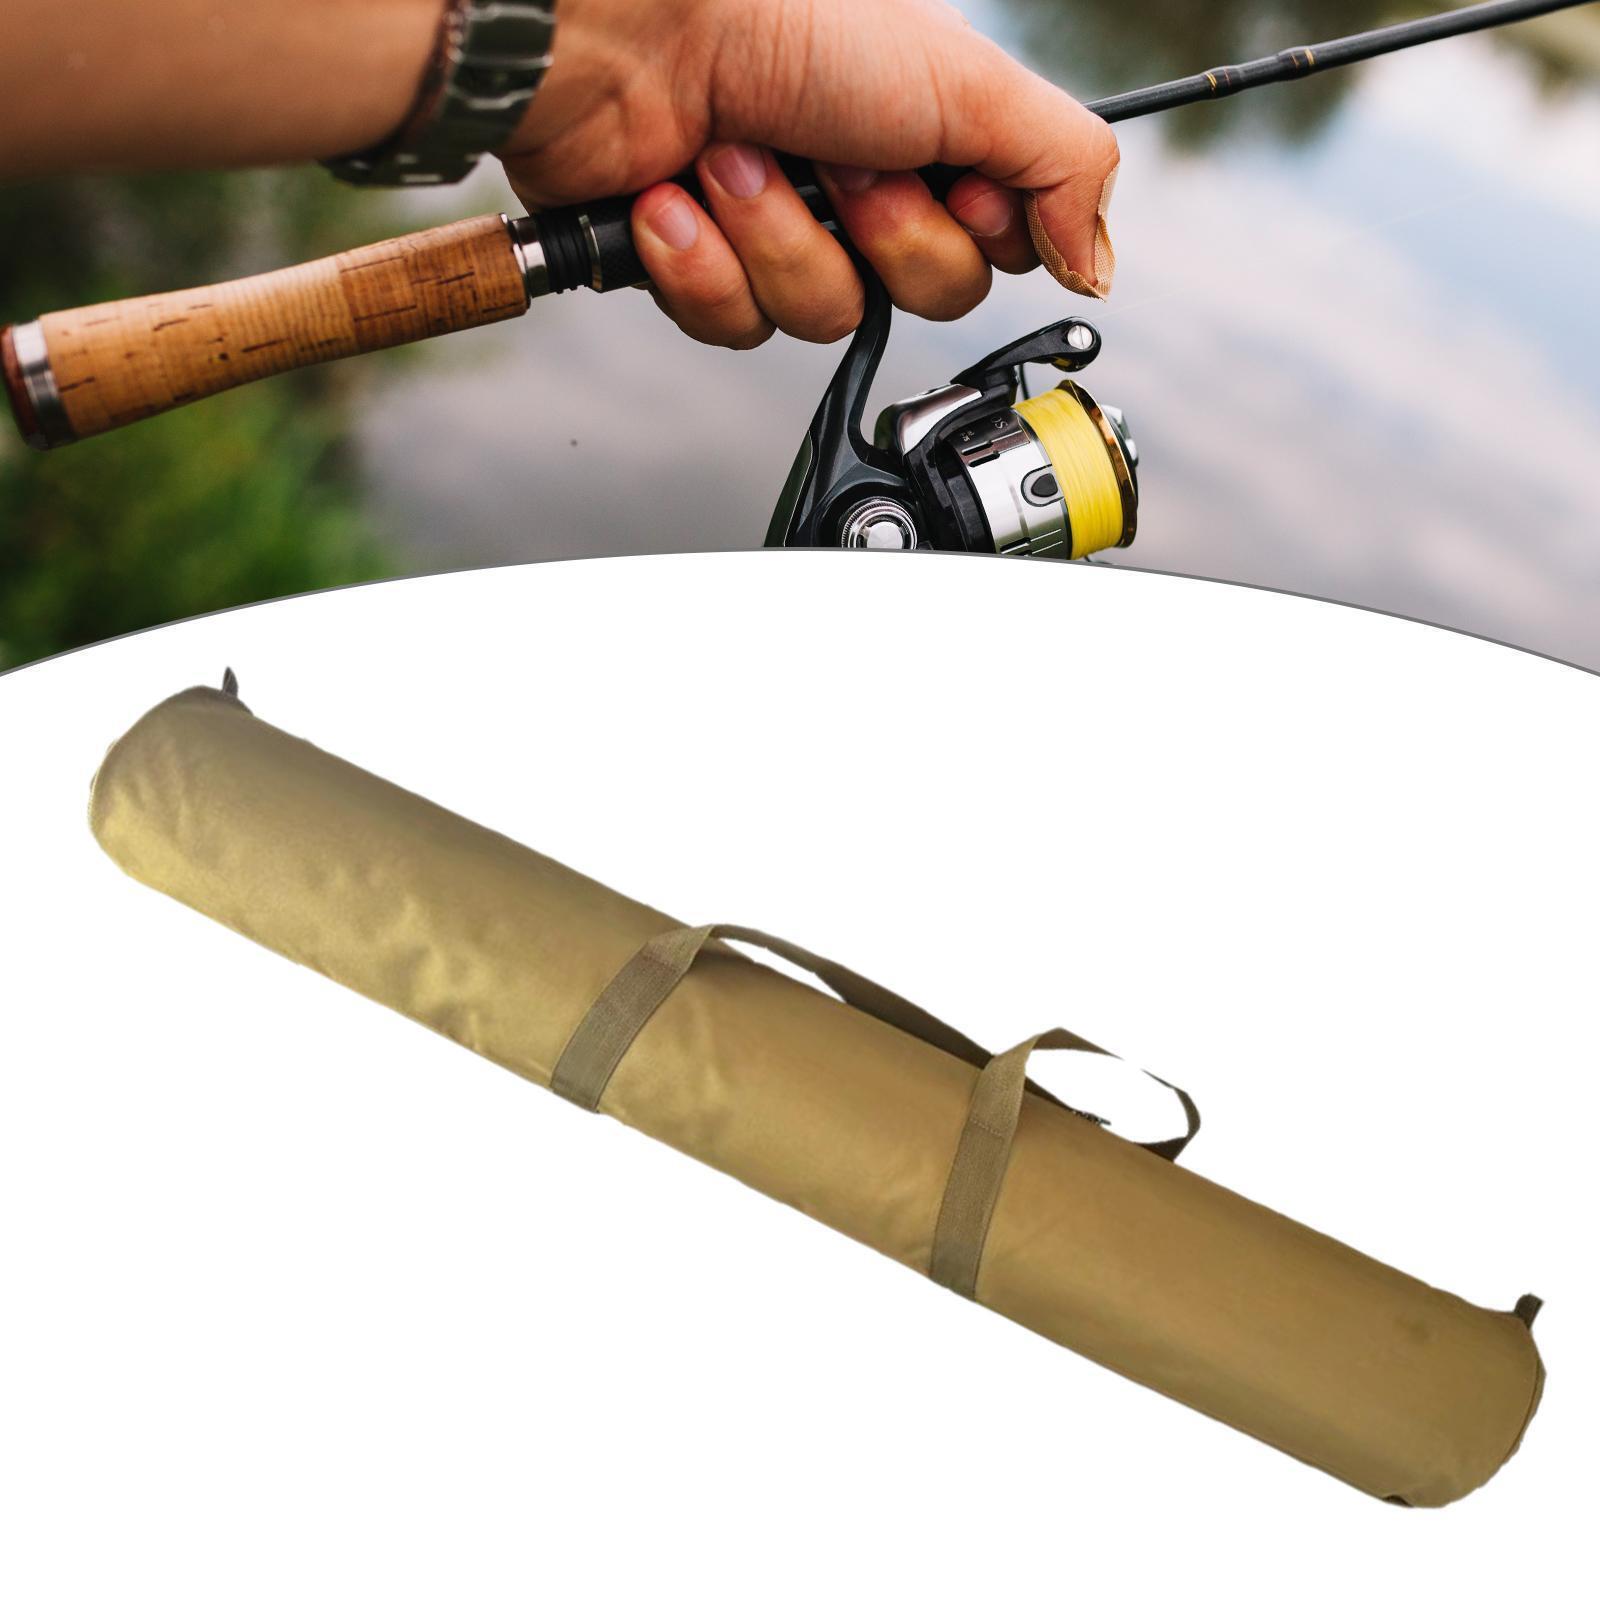 Tent Pole Storage Bag Zipper Fishing Pole Case for Backpacking Travel Hiking